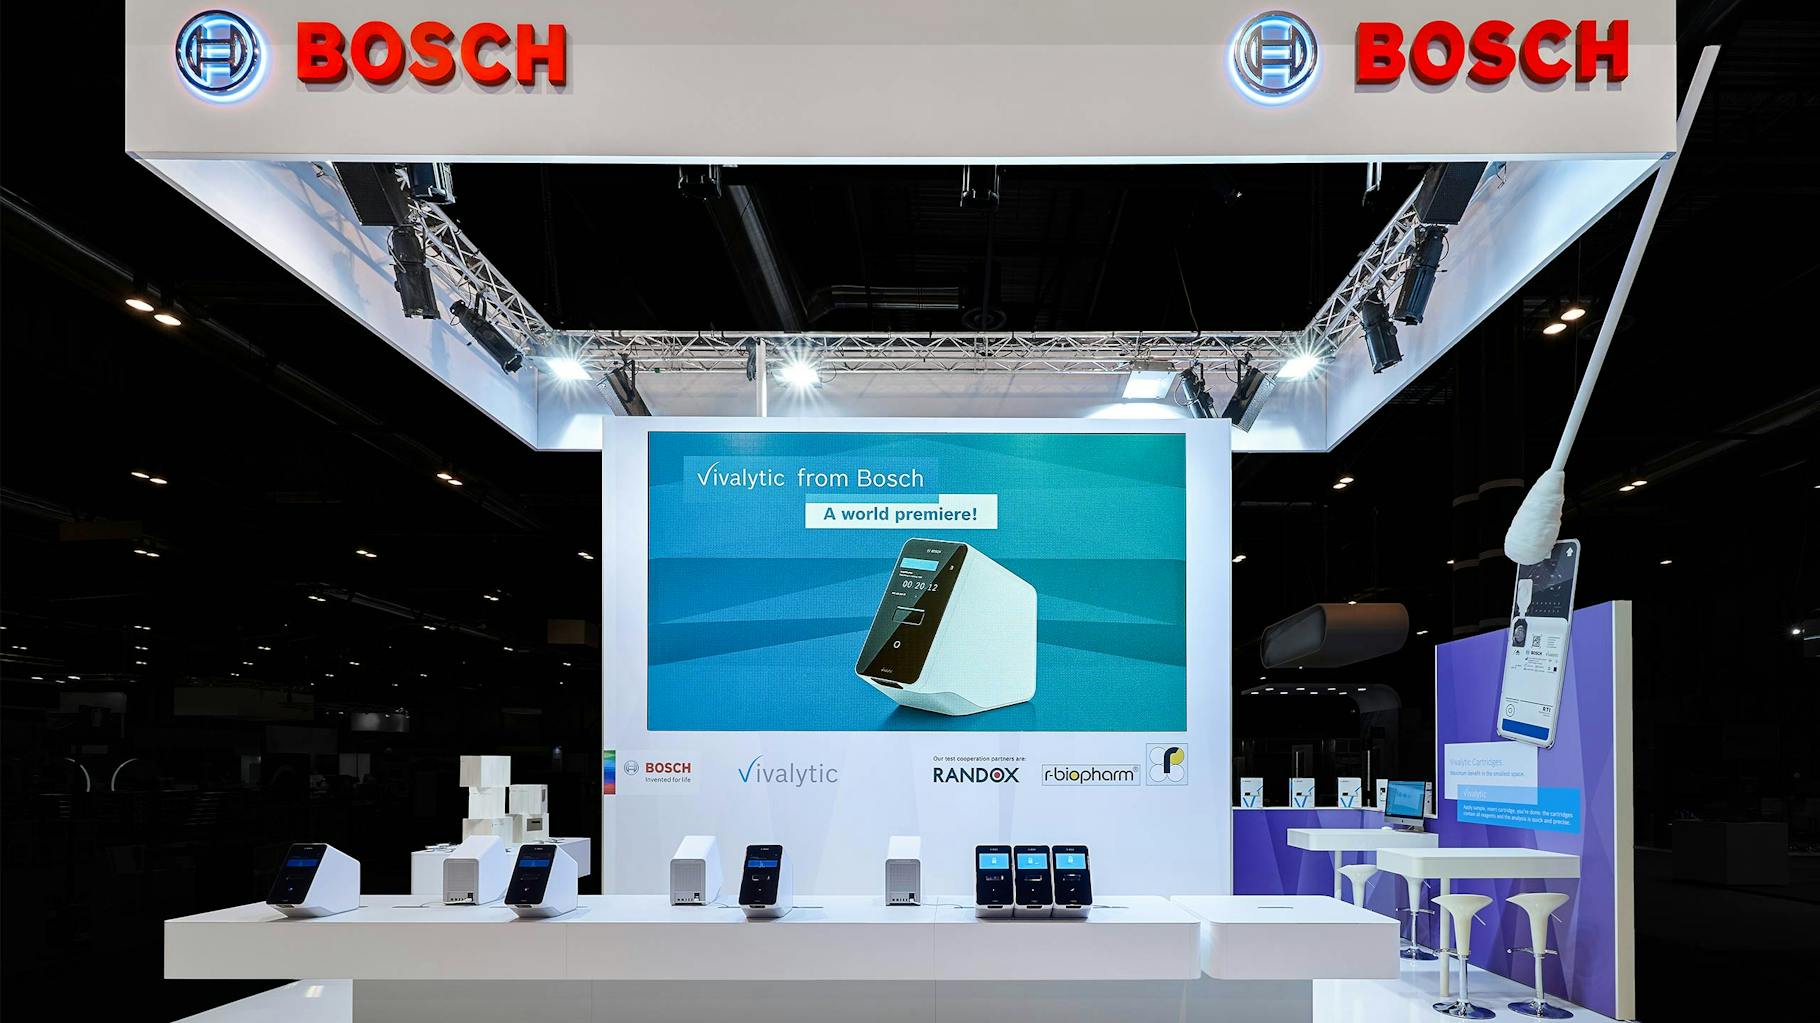 The front view from the Bosch trade fair stand 